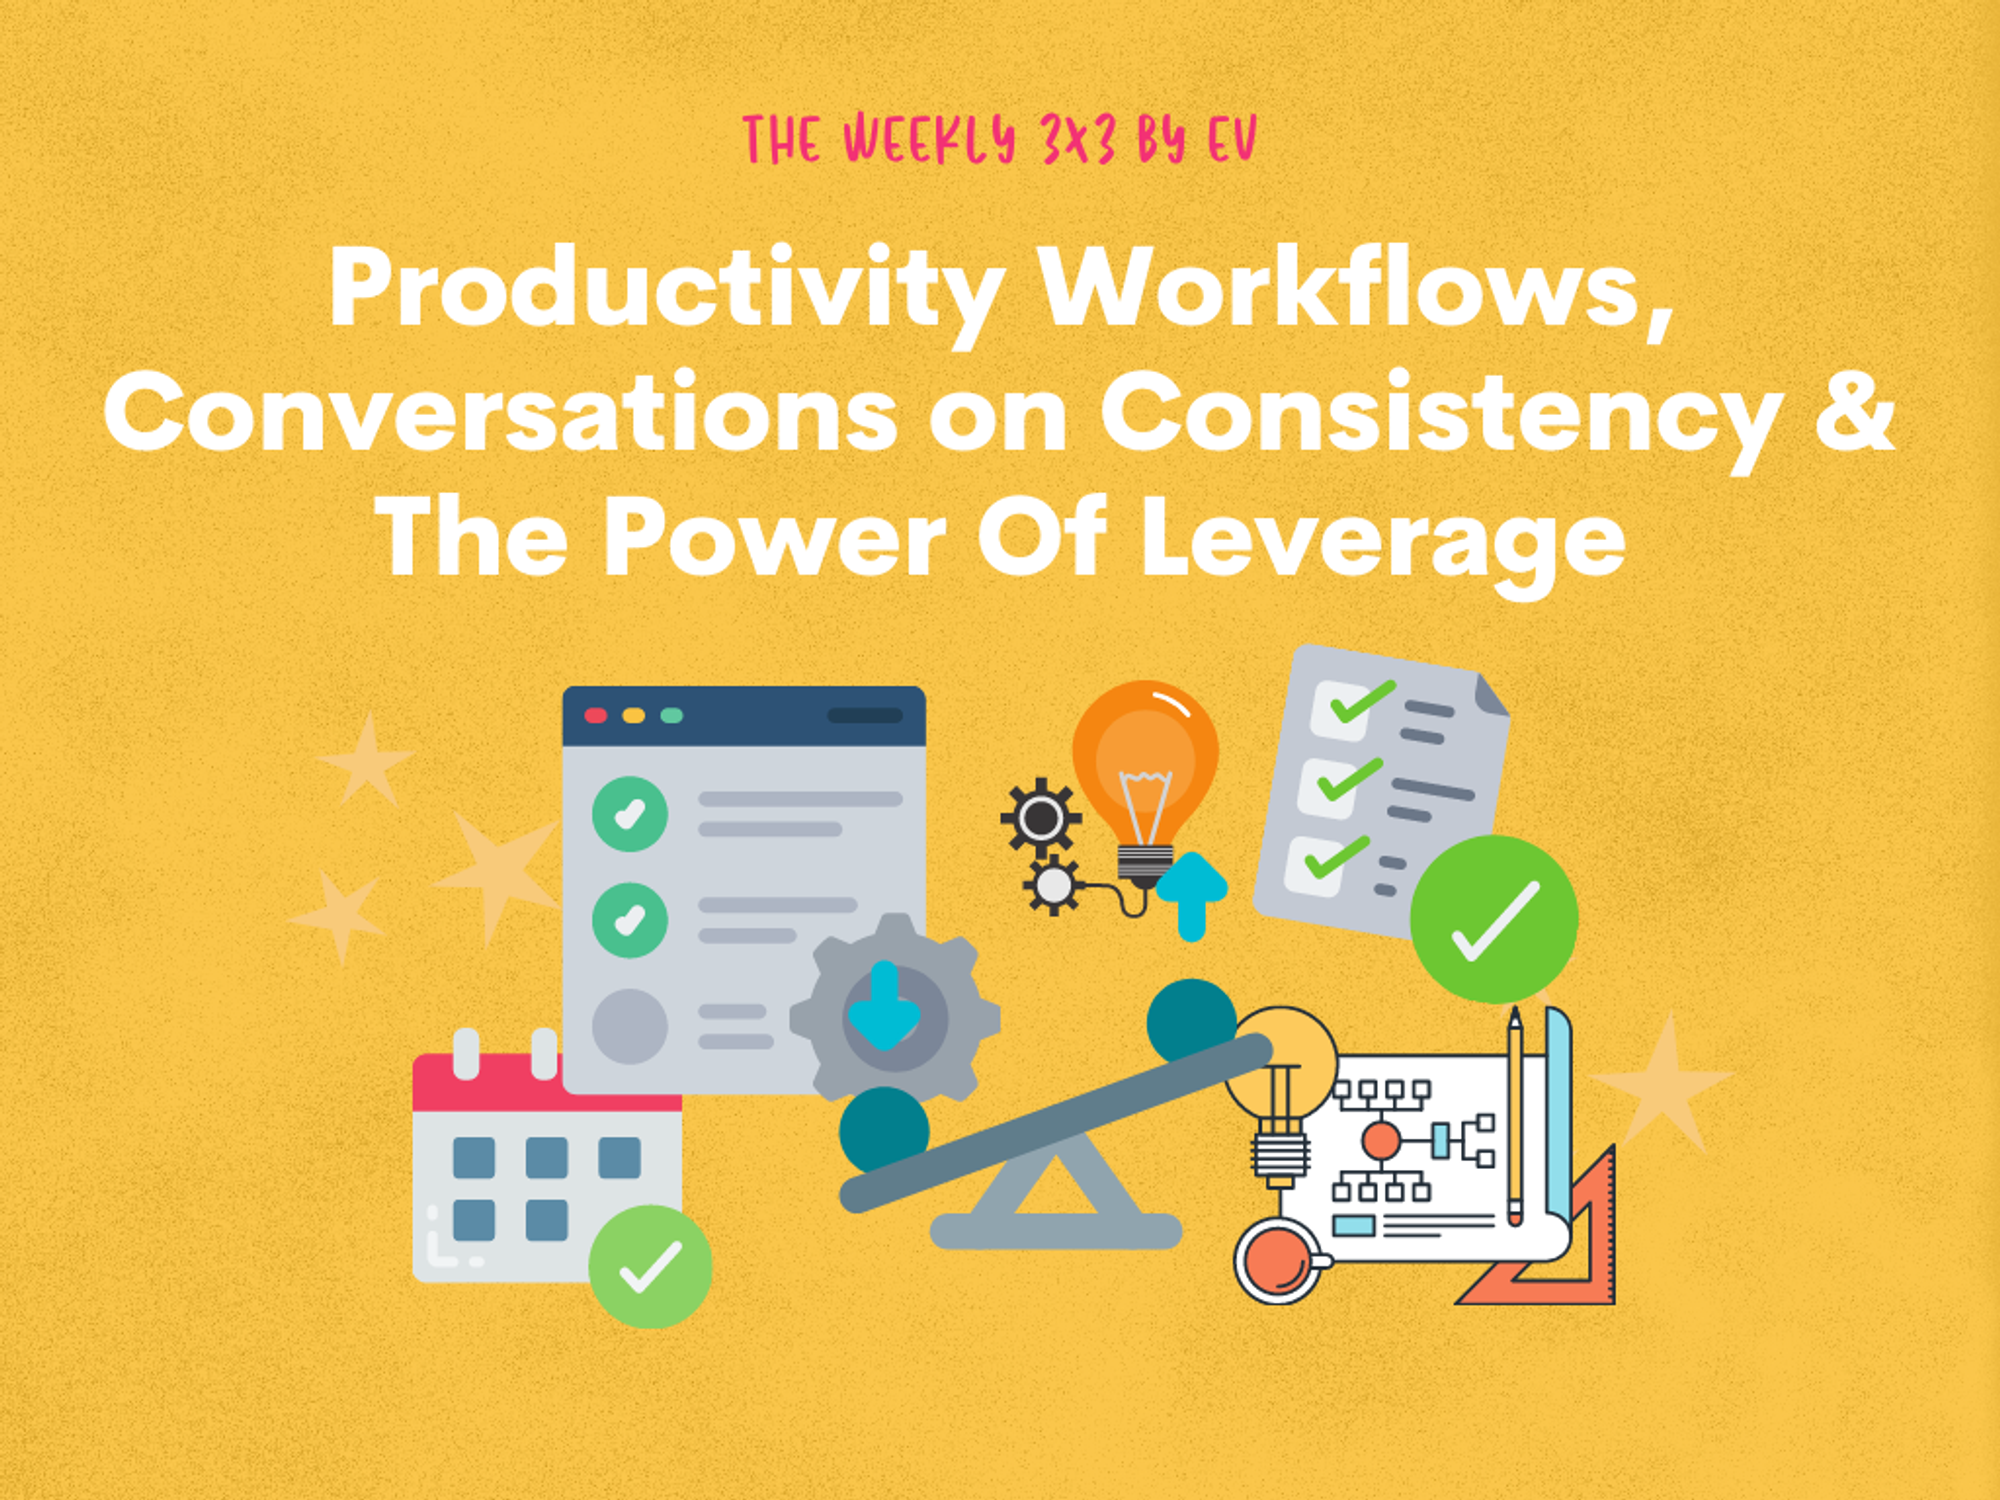 Weekly 3x3: Productivity workflows, Conversations on Consistency & Leverage